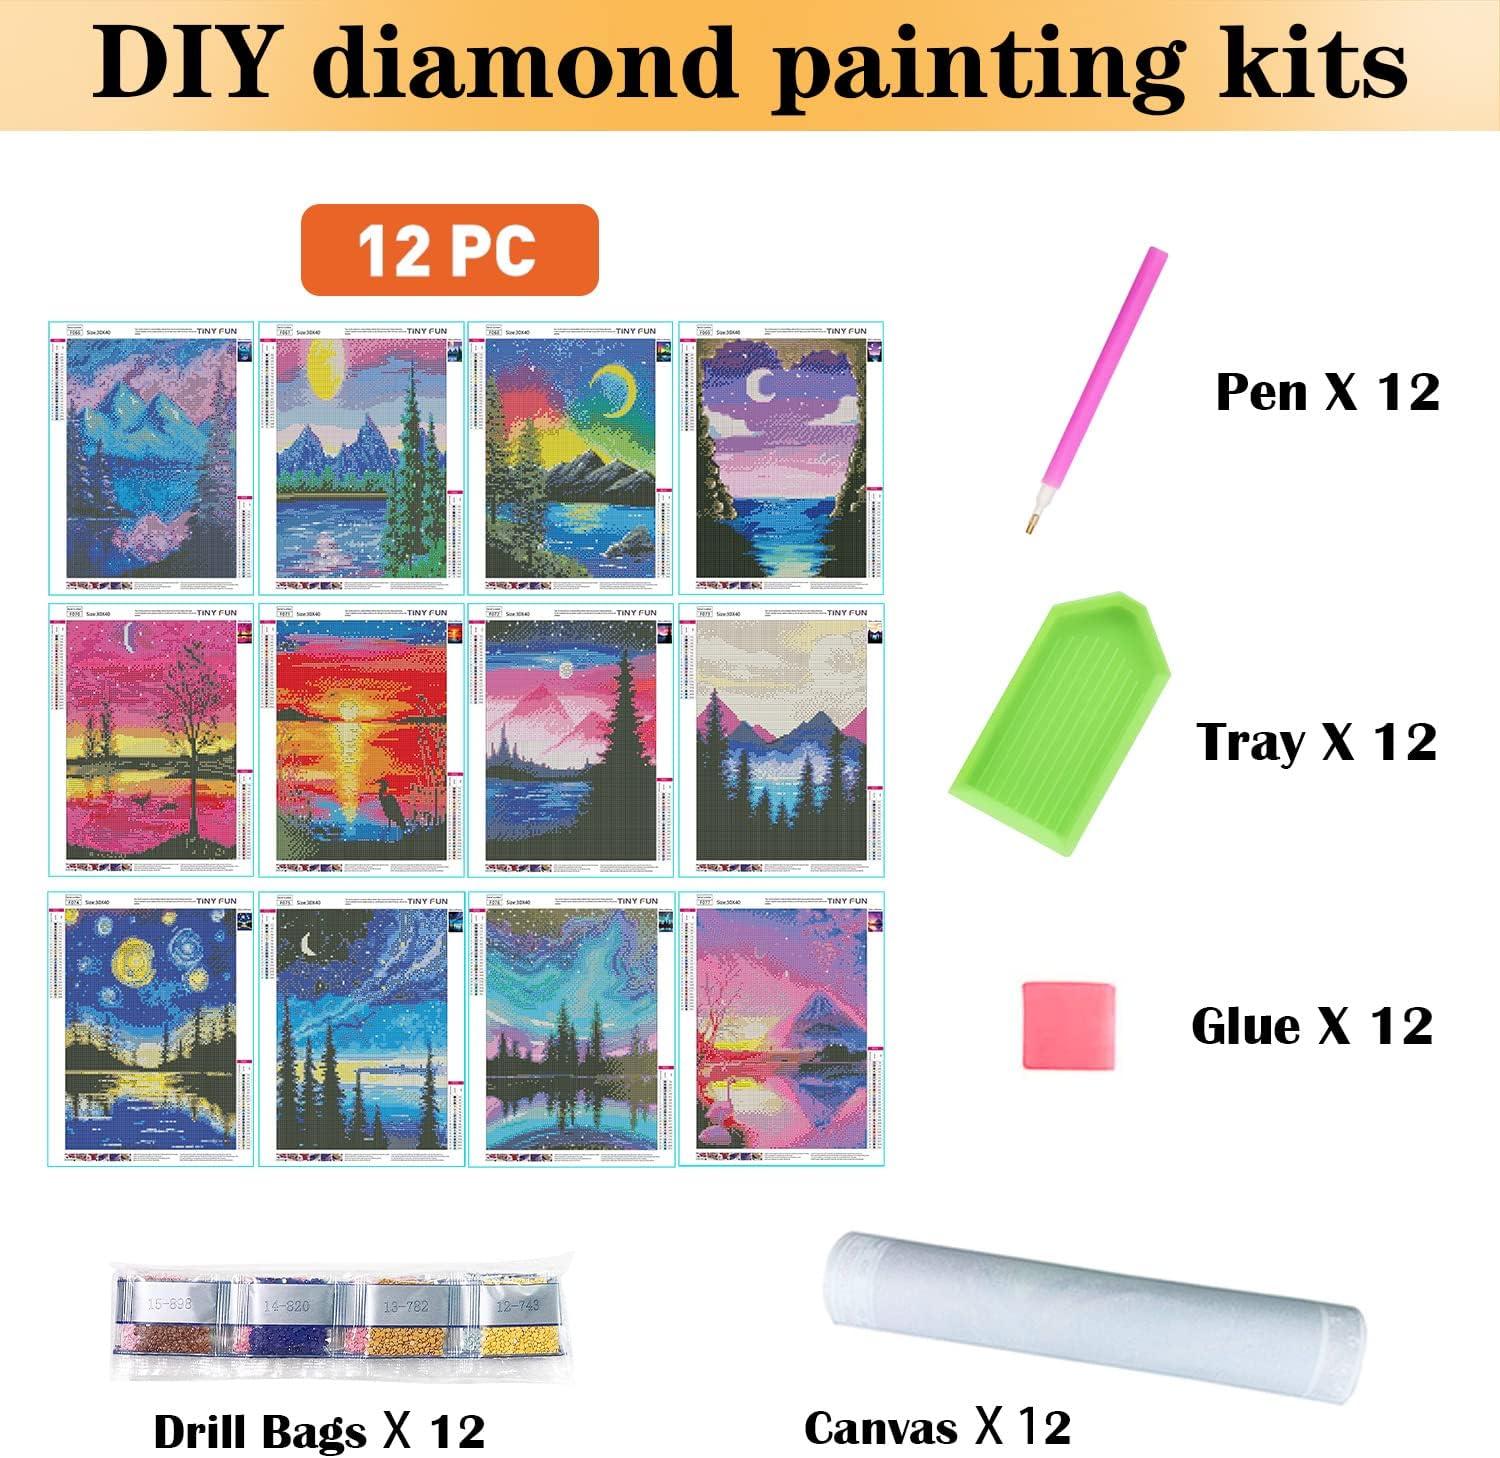  Disney Diamond Painting Kits for Adults -6 Pack 5D Diamond Art  Kits for Kids & Beginners Full Drill, DIY Diamond Dots Paintings with  Diamonds Gem Art and Crafts for Home Wall